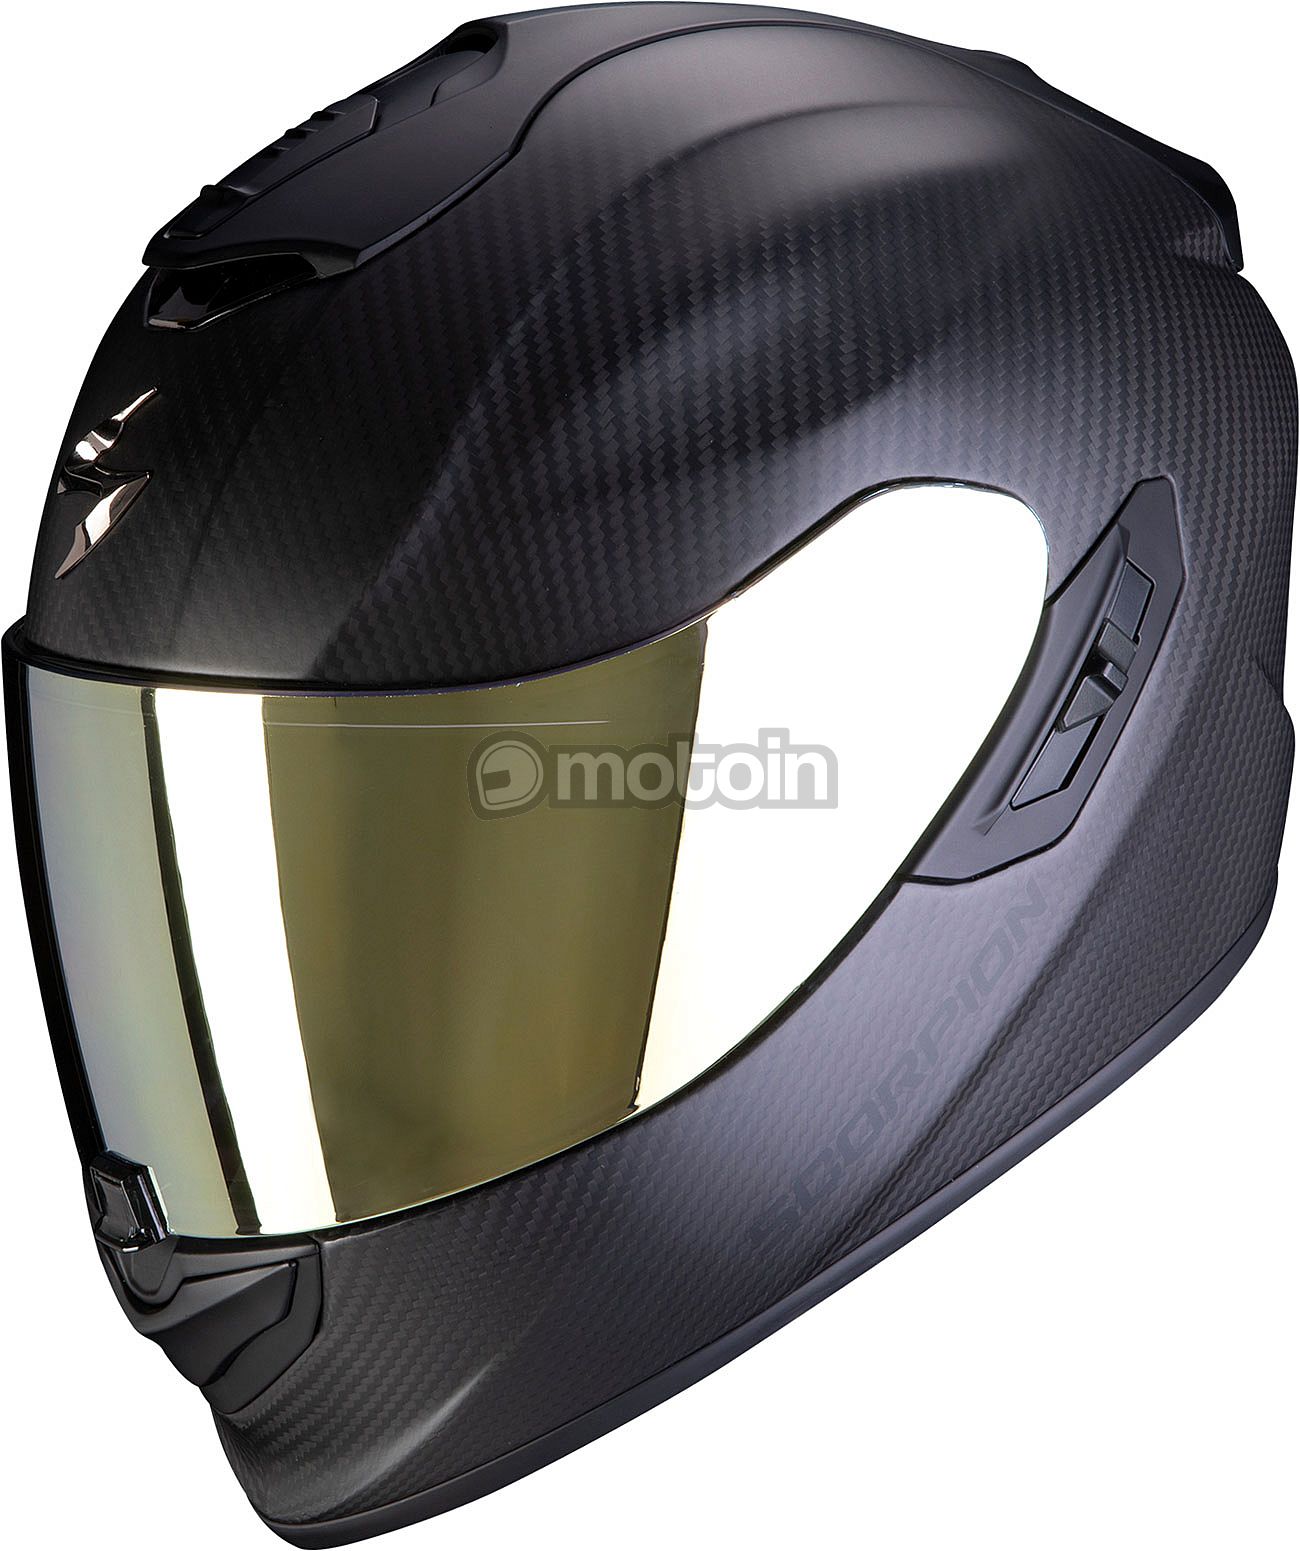 Scorpion EXO-1400 CARBON AIR, 14-261-100 Glossy Carbon